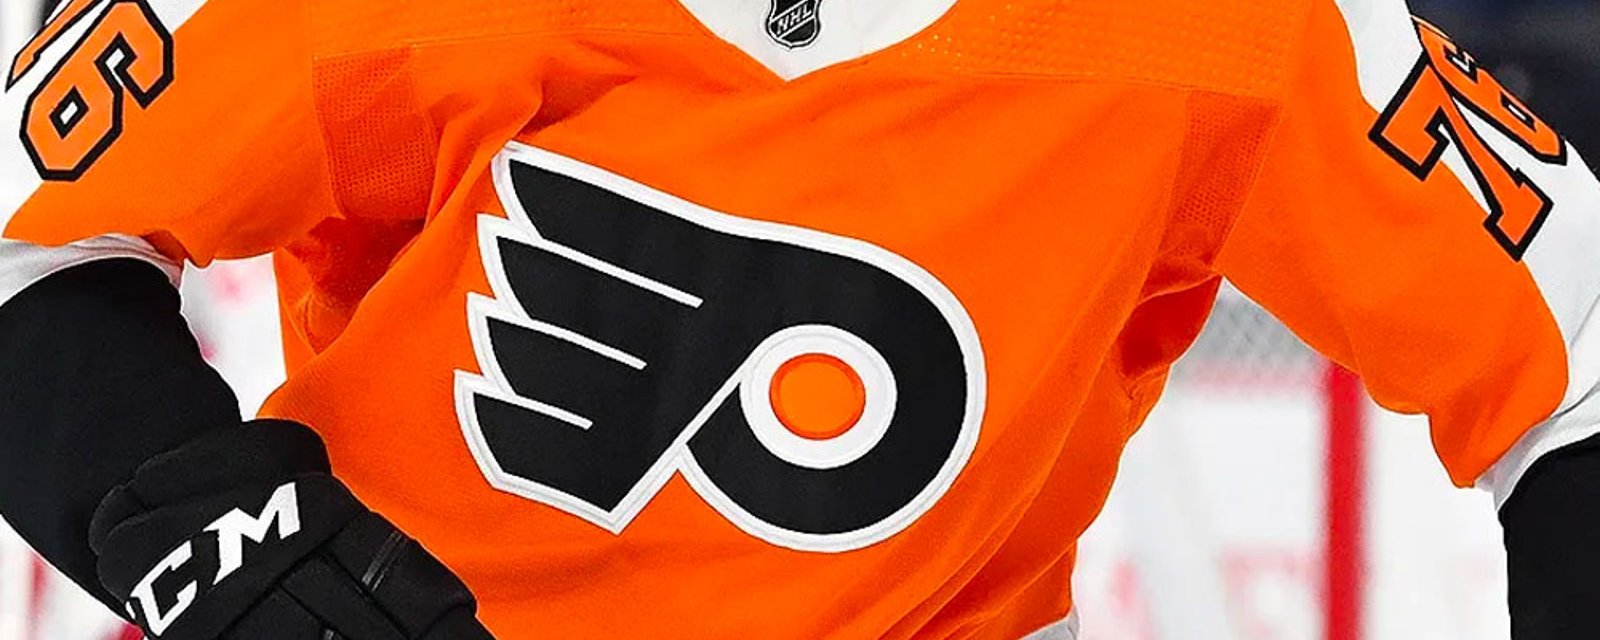 Former Flyers' top prospect signs PTO with a new team